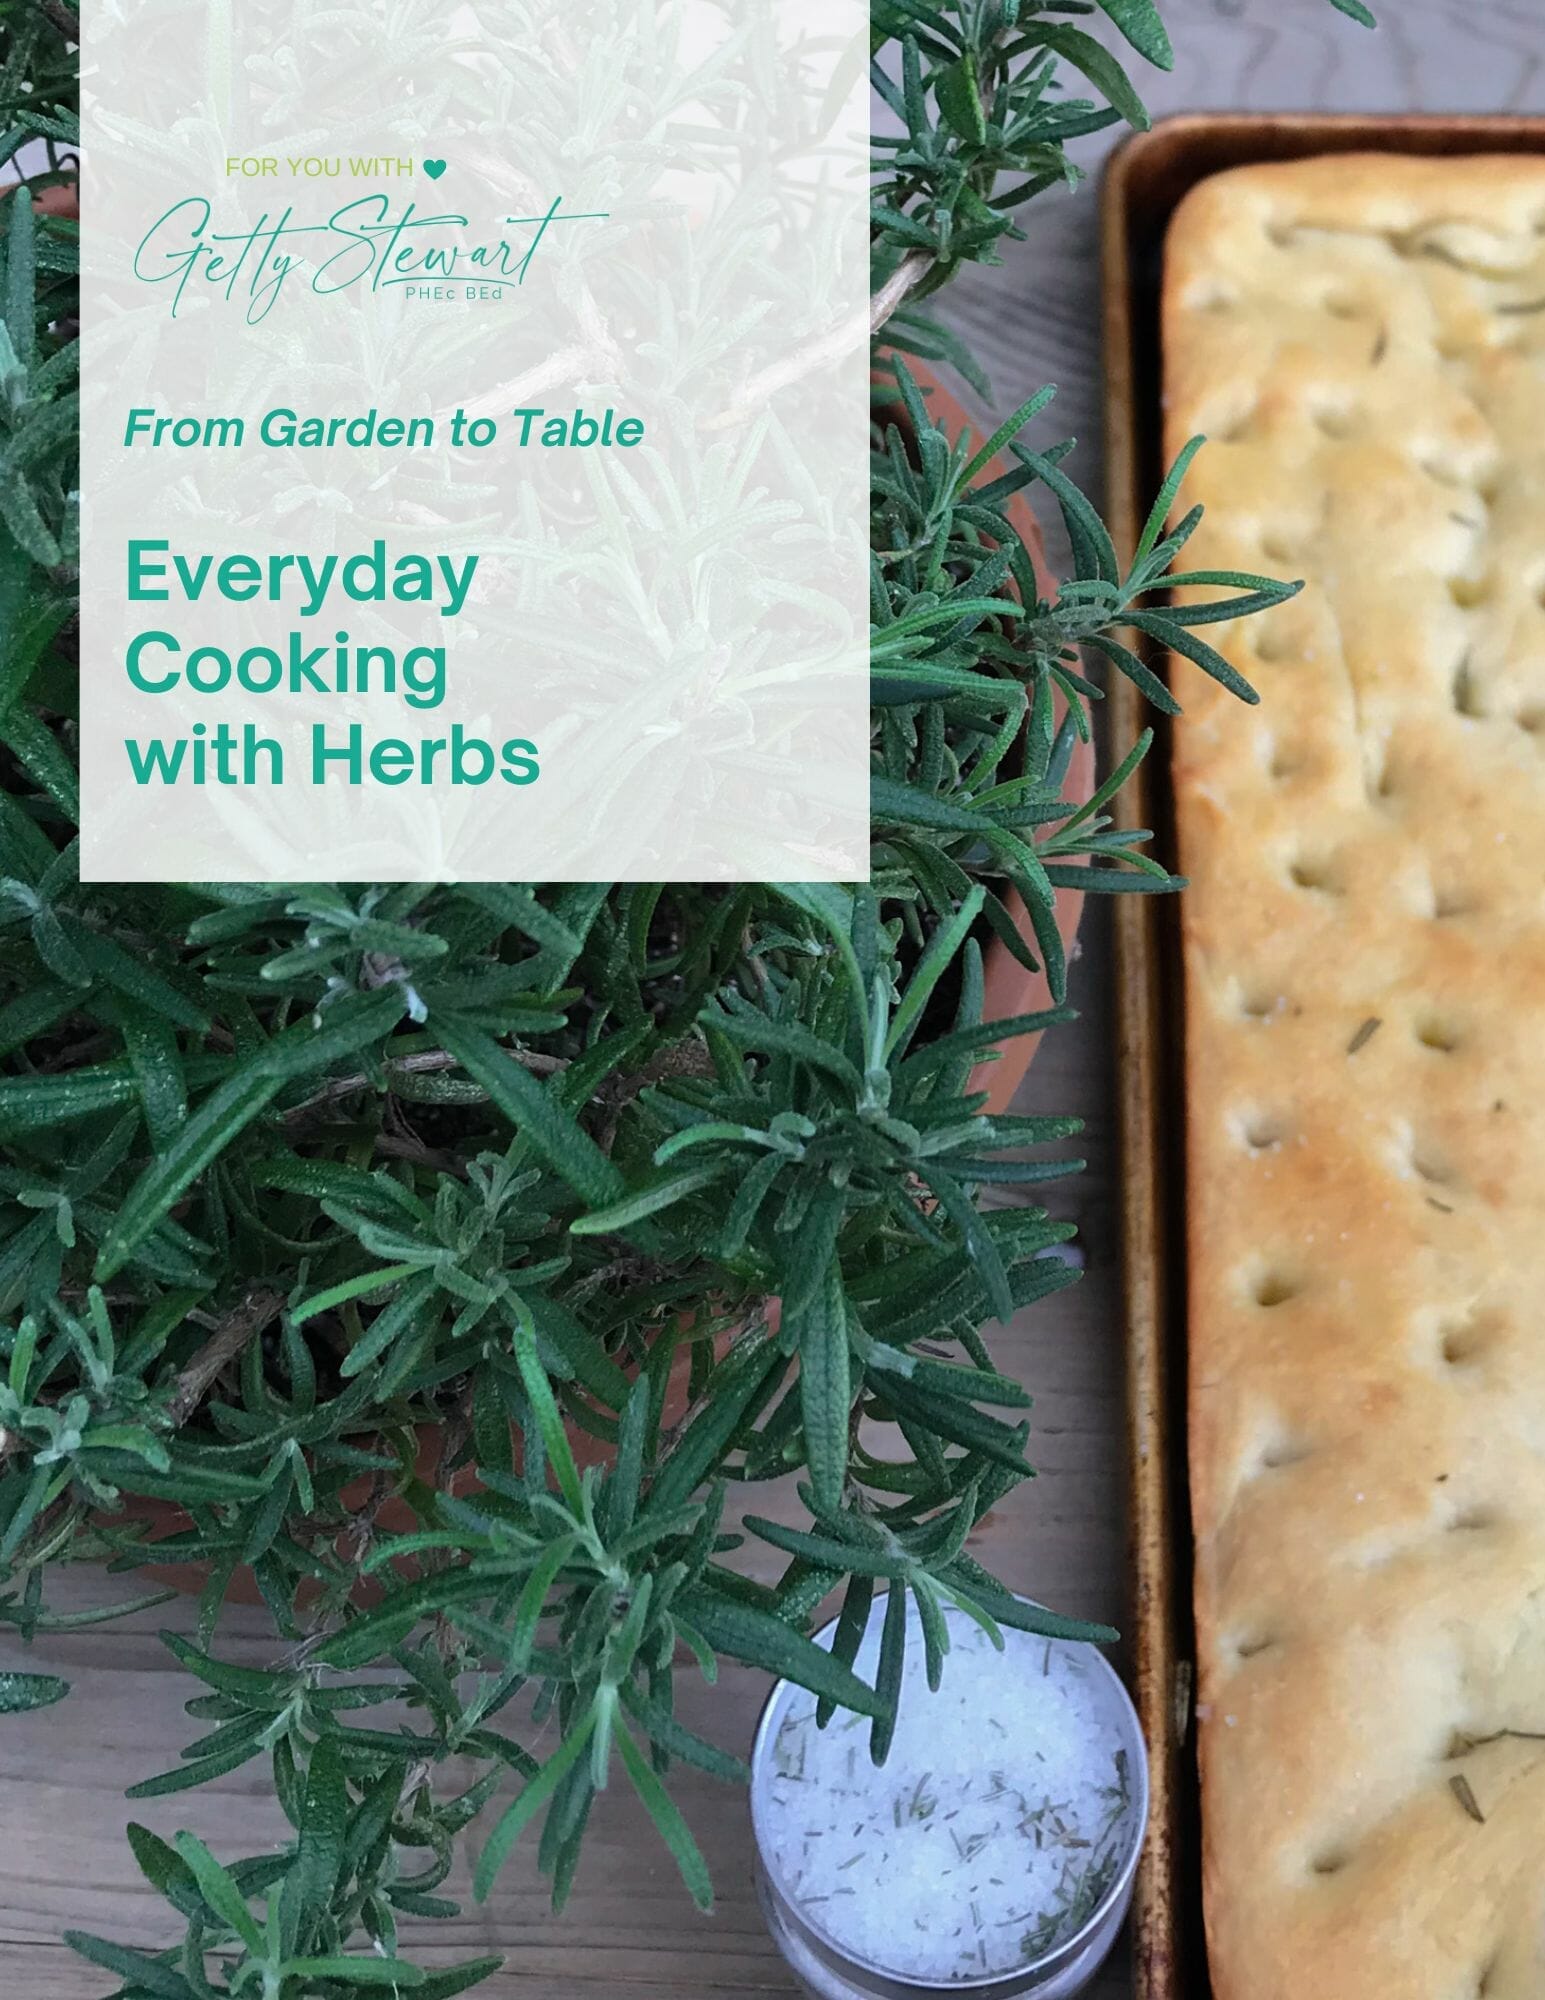 From Garden to Table: Everyday Cooking with Herbs